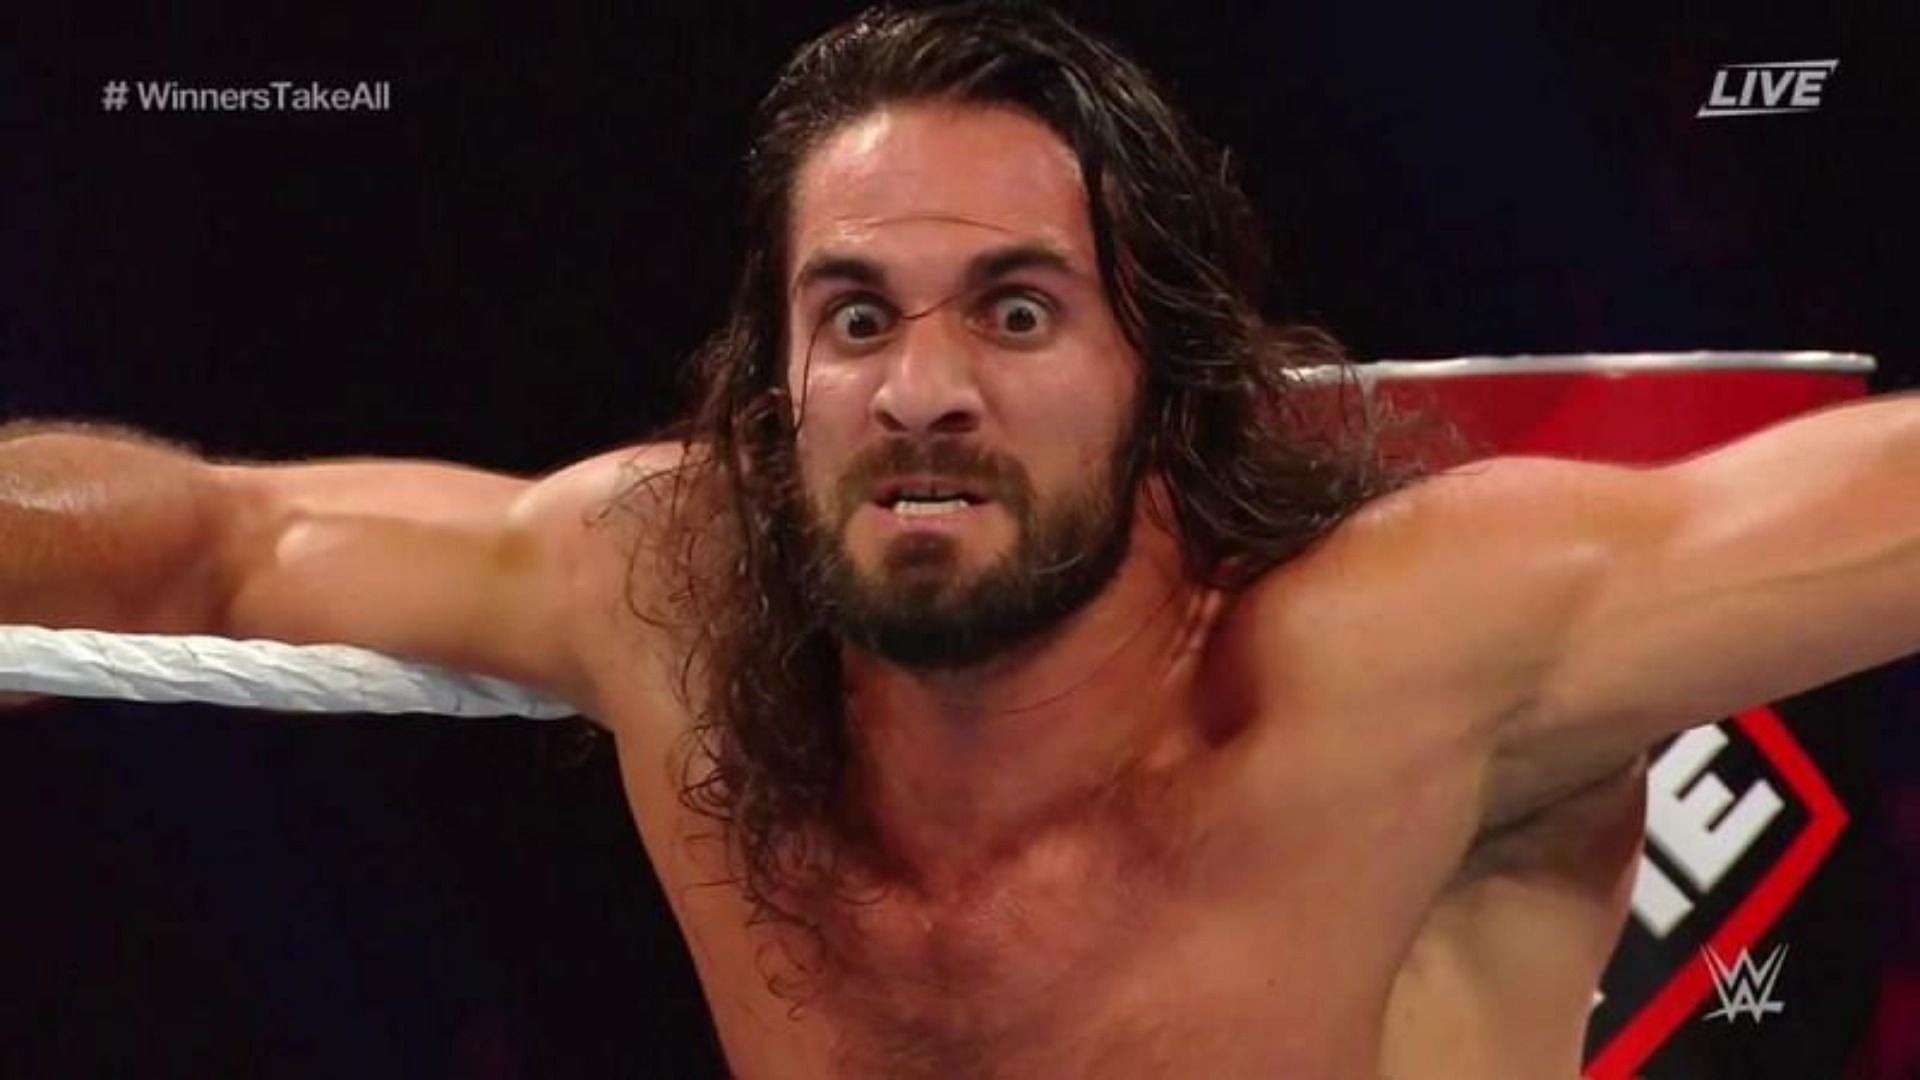 Seth Rollins was attacked by a fan on RAW